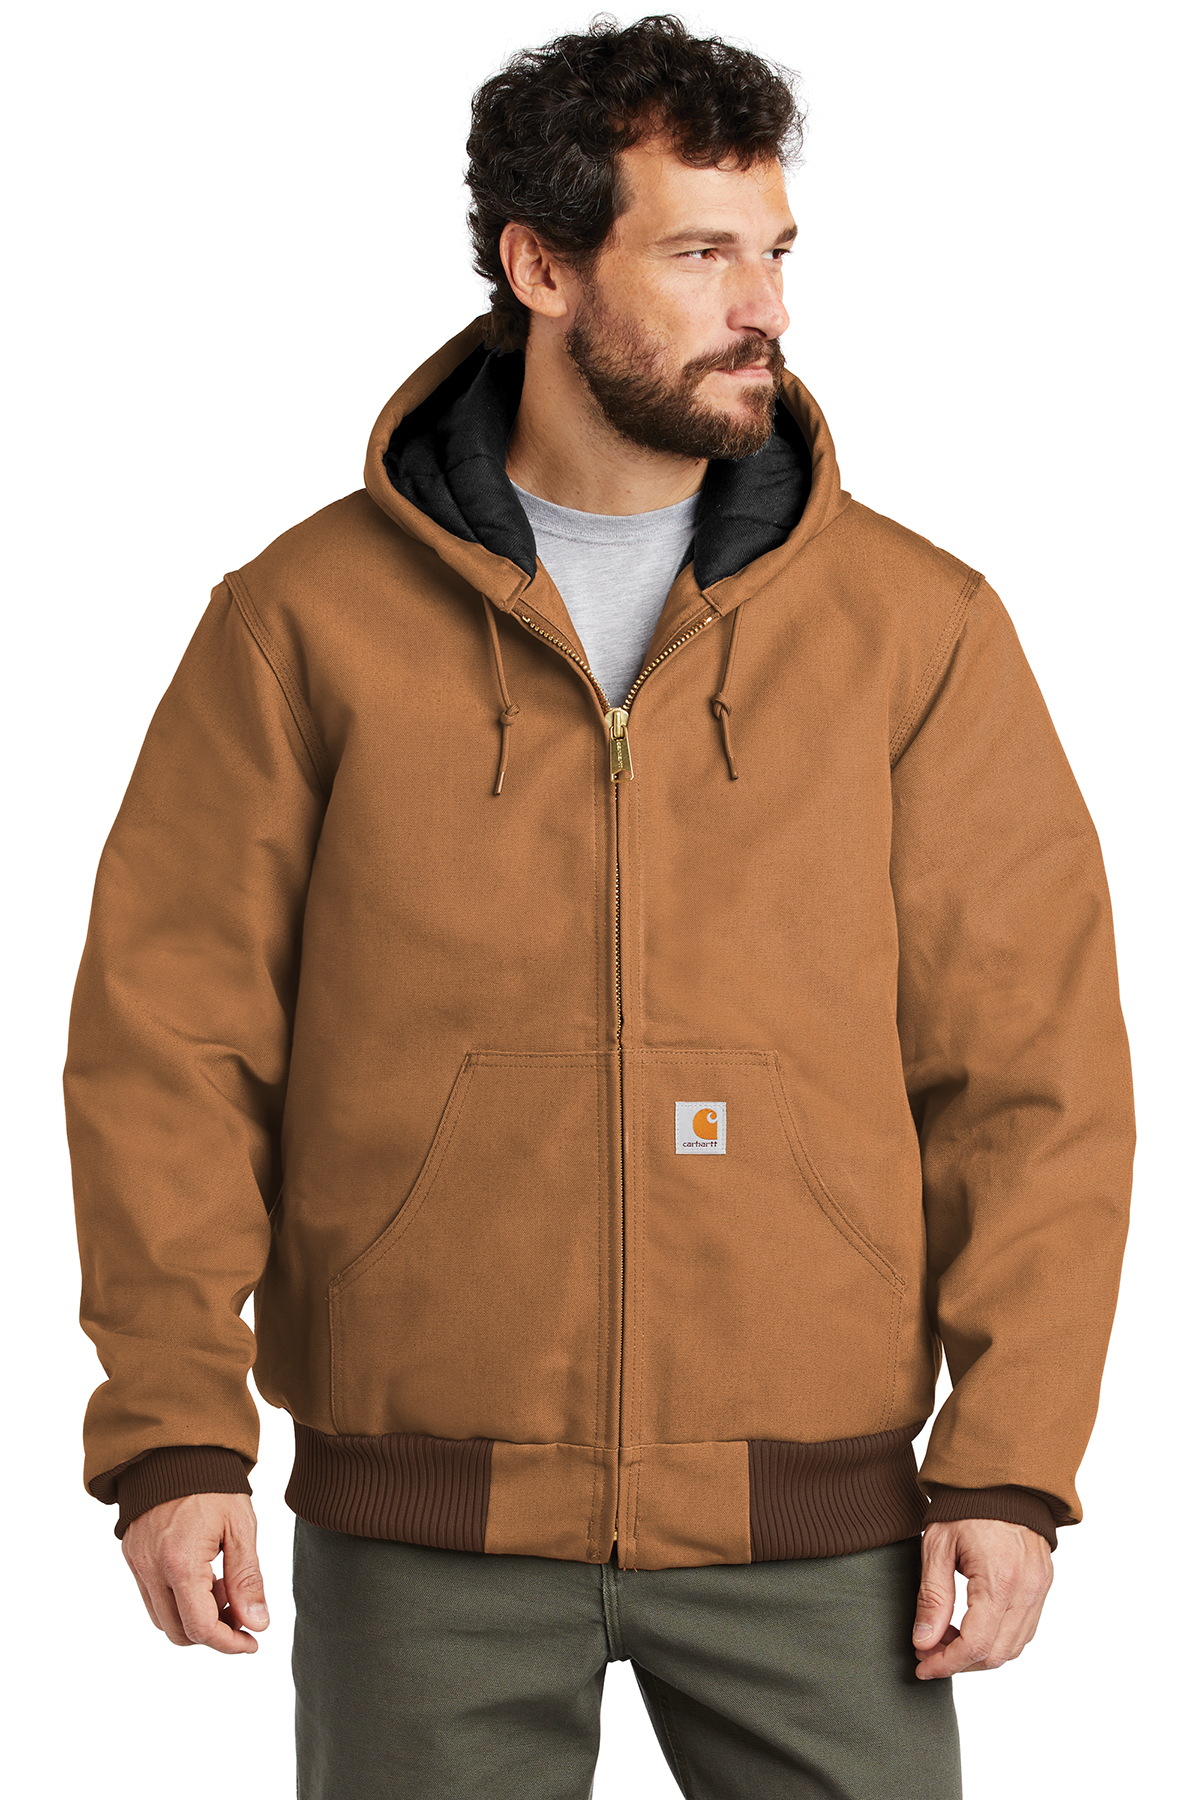 Carhartt Quilted-Flannel-Lined Duck Active Jac | Product